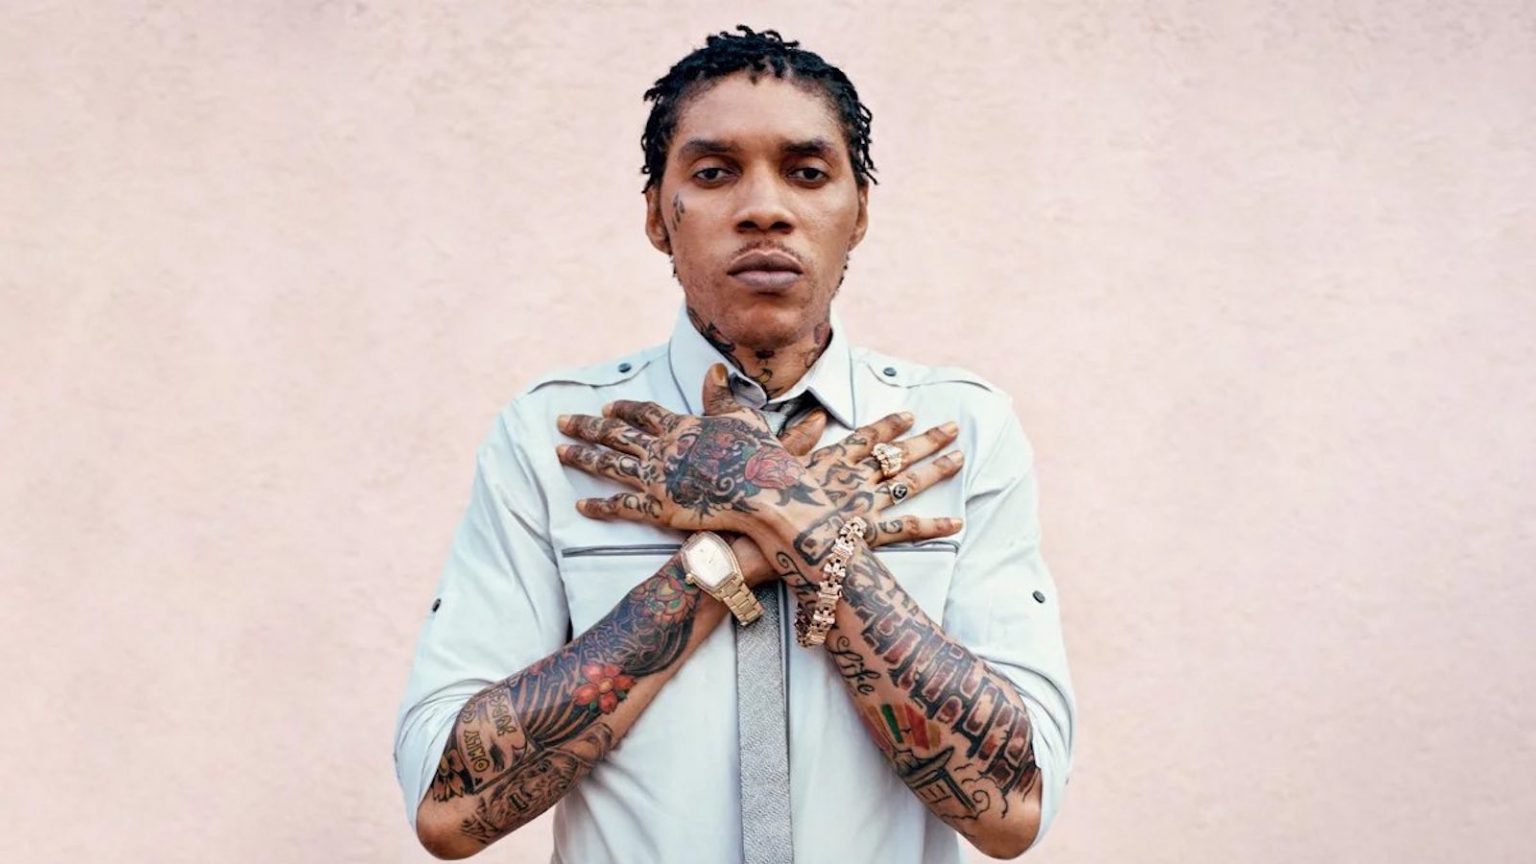 Vybz Kartel - Too Young ft. Lanae